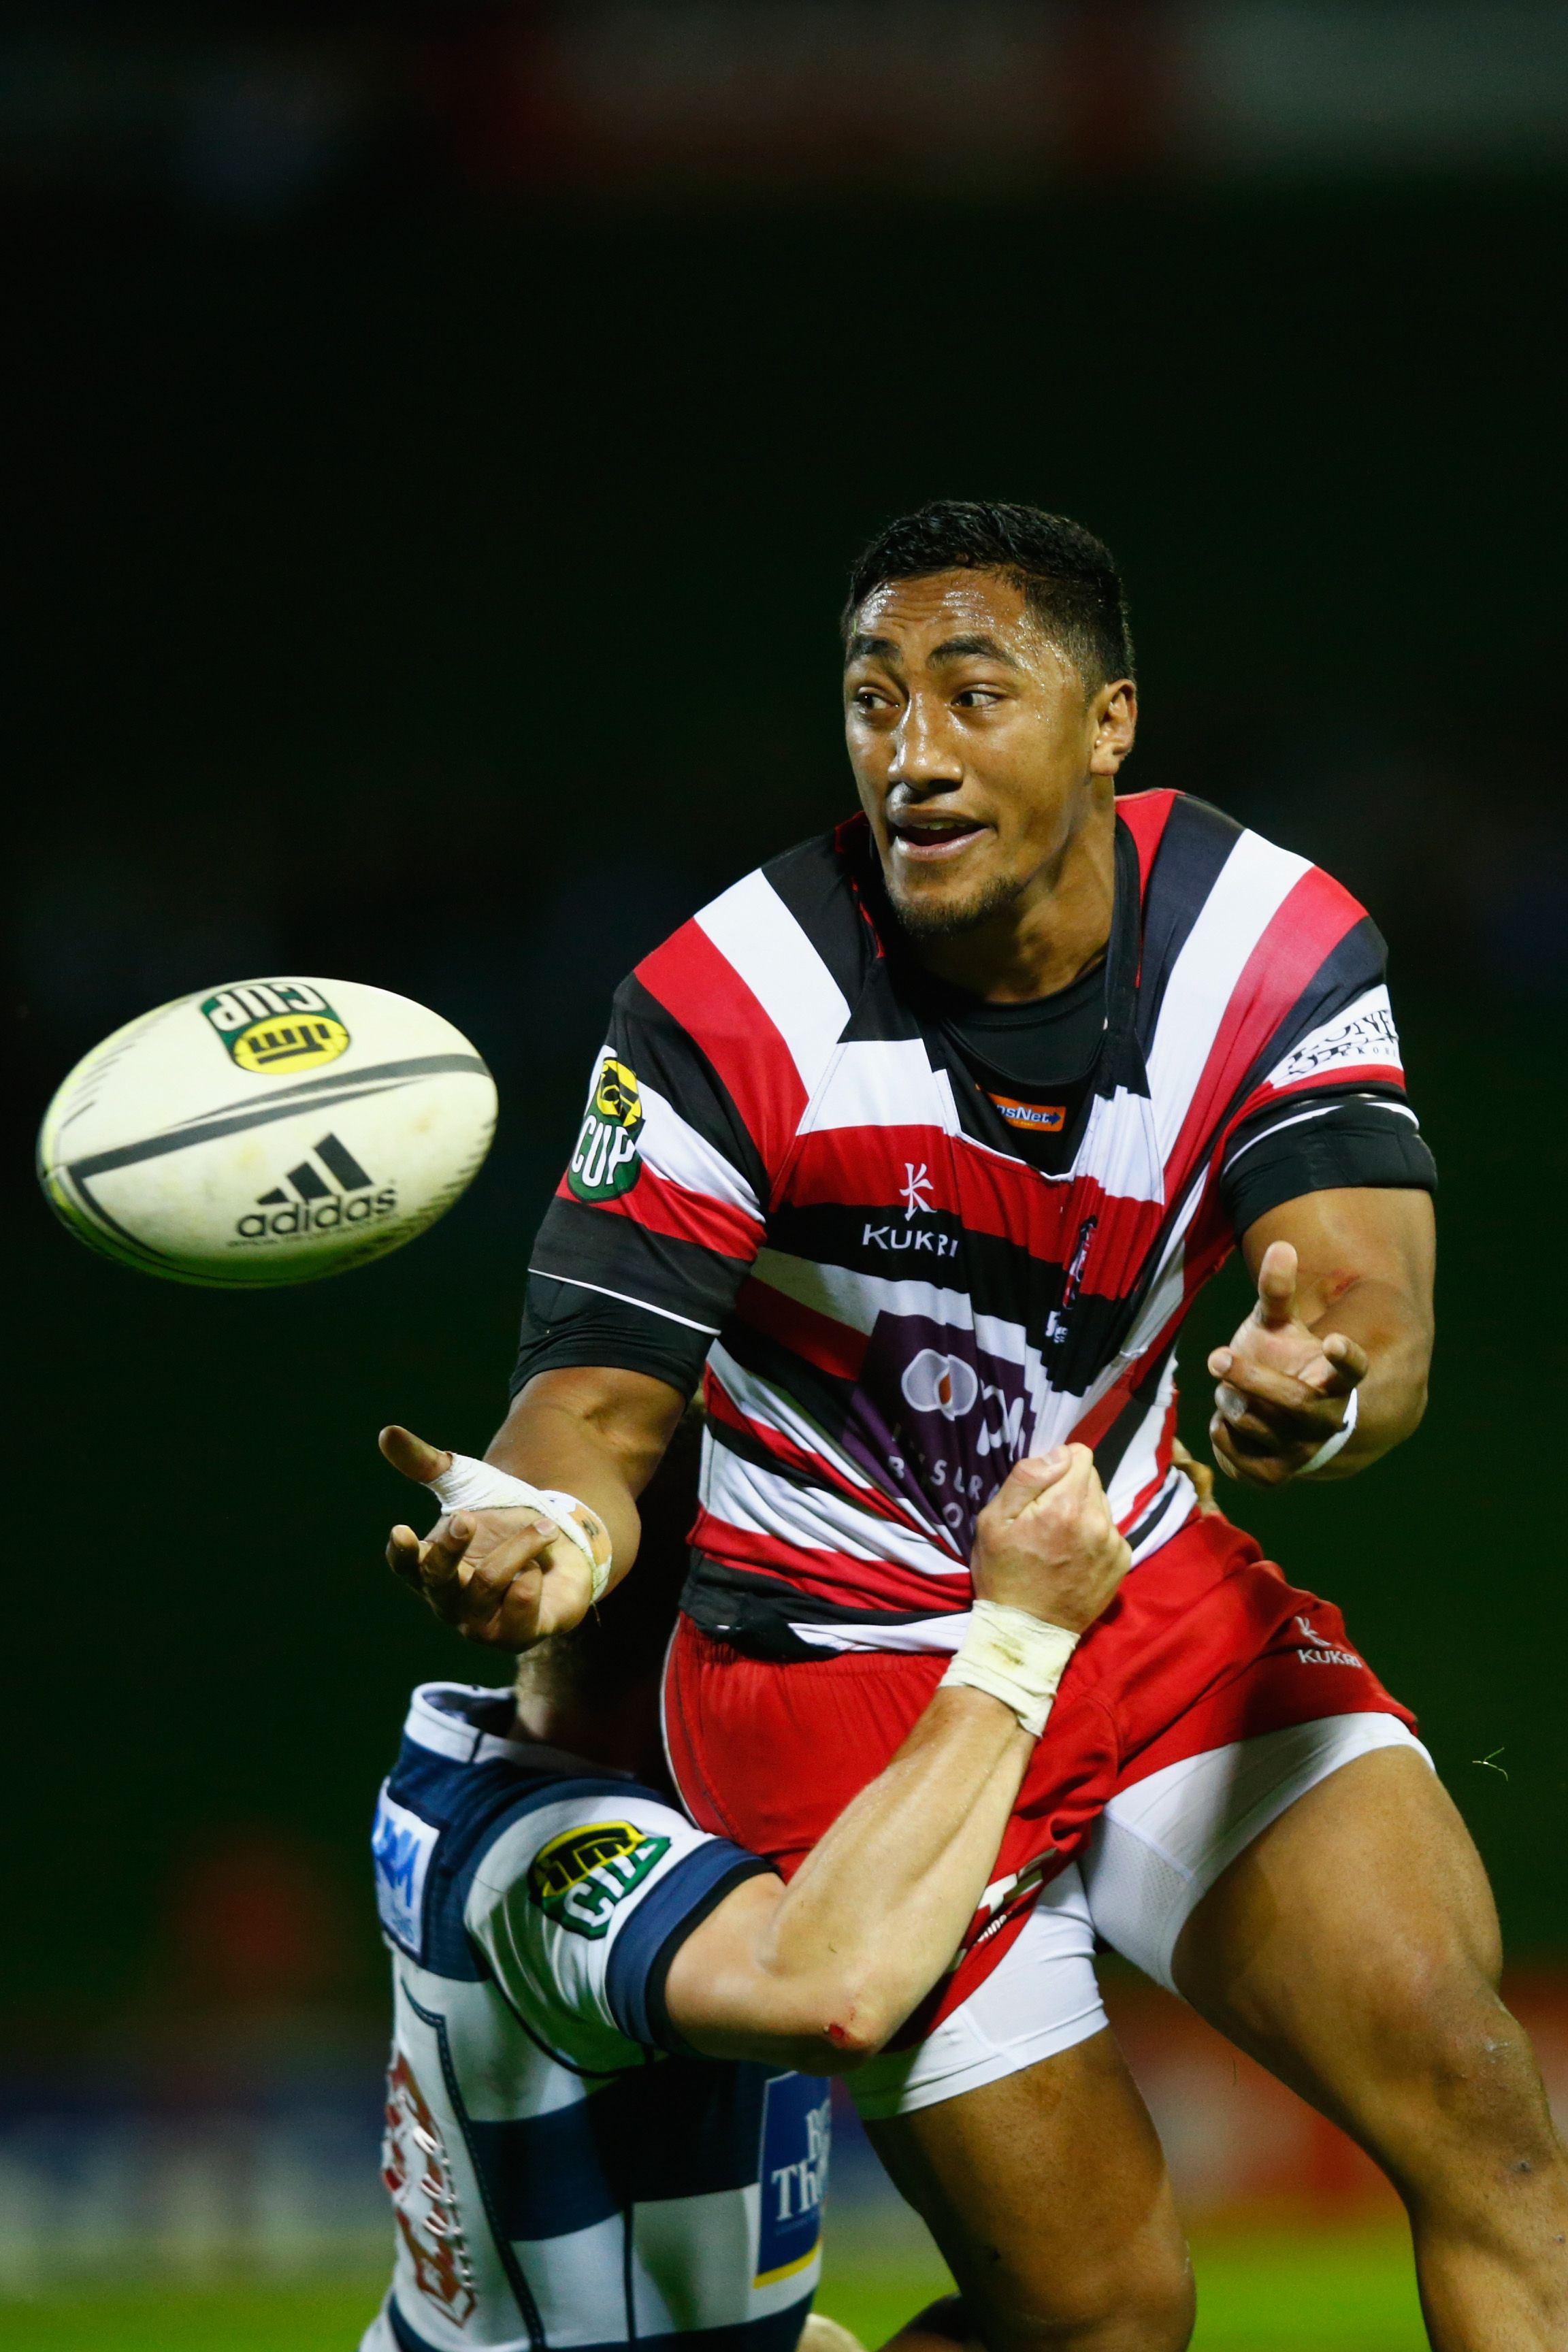 PUKEKOHE, NEW ZEALAND - OCTOBER 08: Bundee Aki of Counties is tackled by Gareth Anscombe of Auckland during the round nine ITM Cup match between Counties Manukau and Auckland at ECOLight Stadium on October 8, 2014 in Pukekohe, New Zealand. (Photo by Phil Walter/Getty Images)